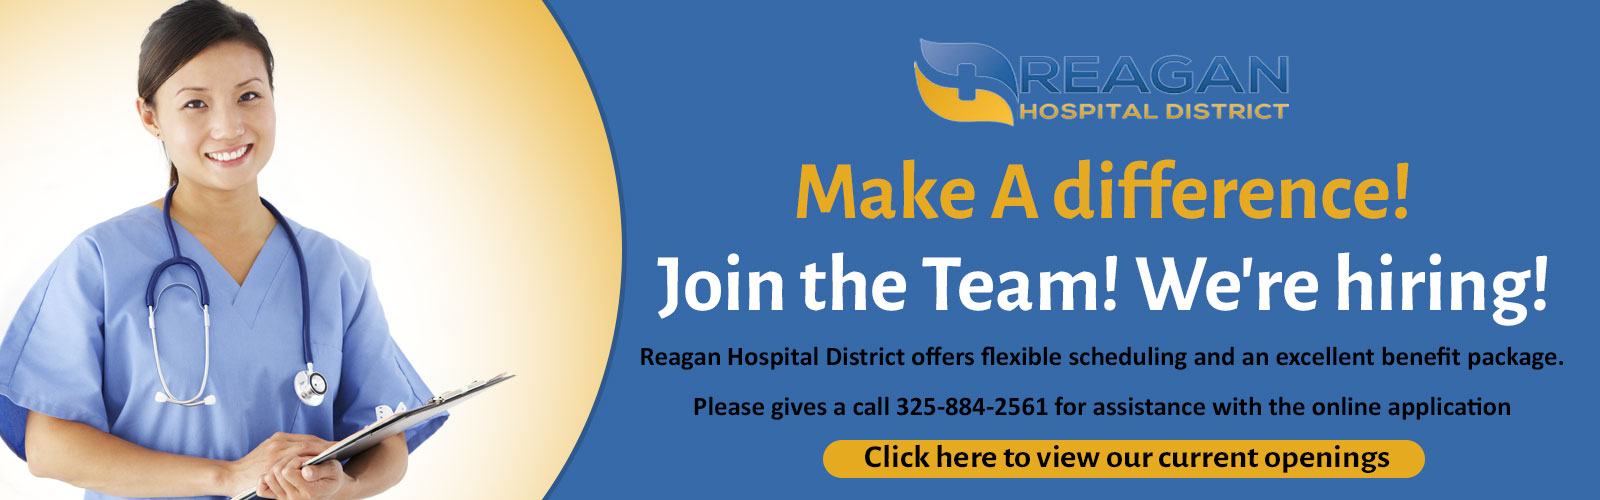 REAGAN HOSPITAL DISTRICT
Make A Difference!
Join the team! We're hiring!
Reagan Hospital District offers flexible scheduling and an excellent benefit package.
Please give us a call 325-884-2561 for assistance with the online application
(Click here to view our current openings)